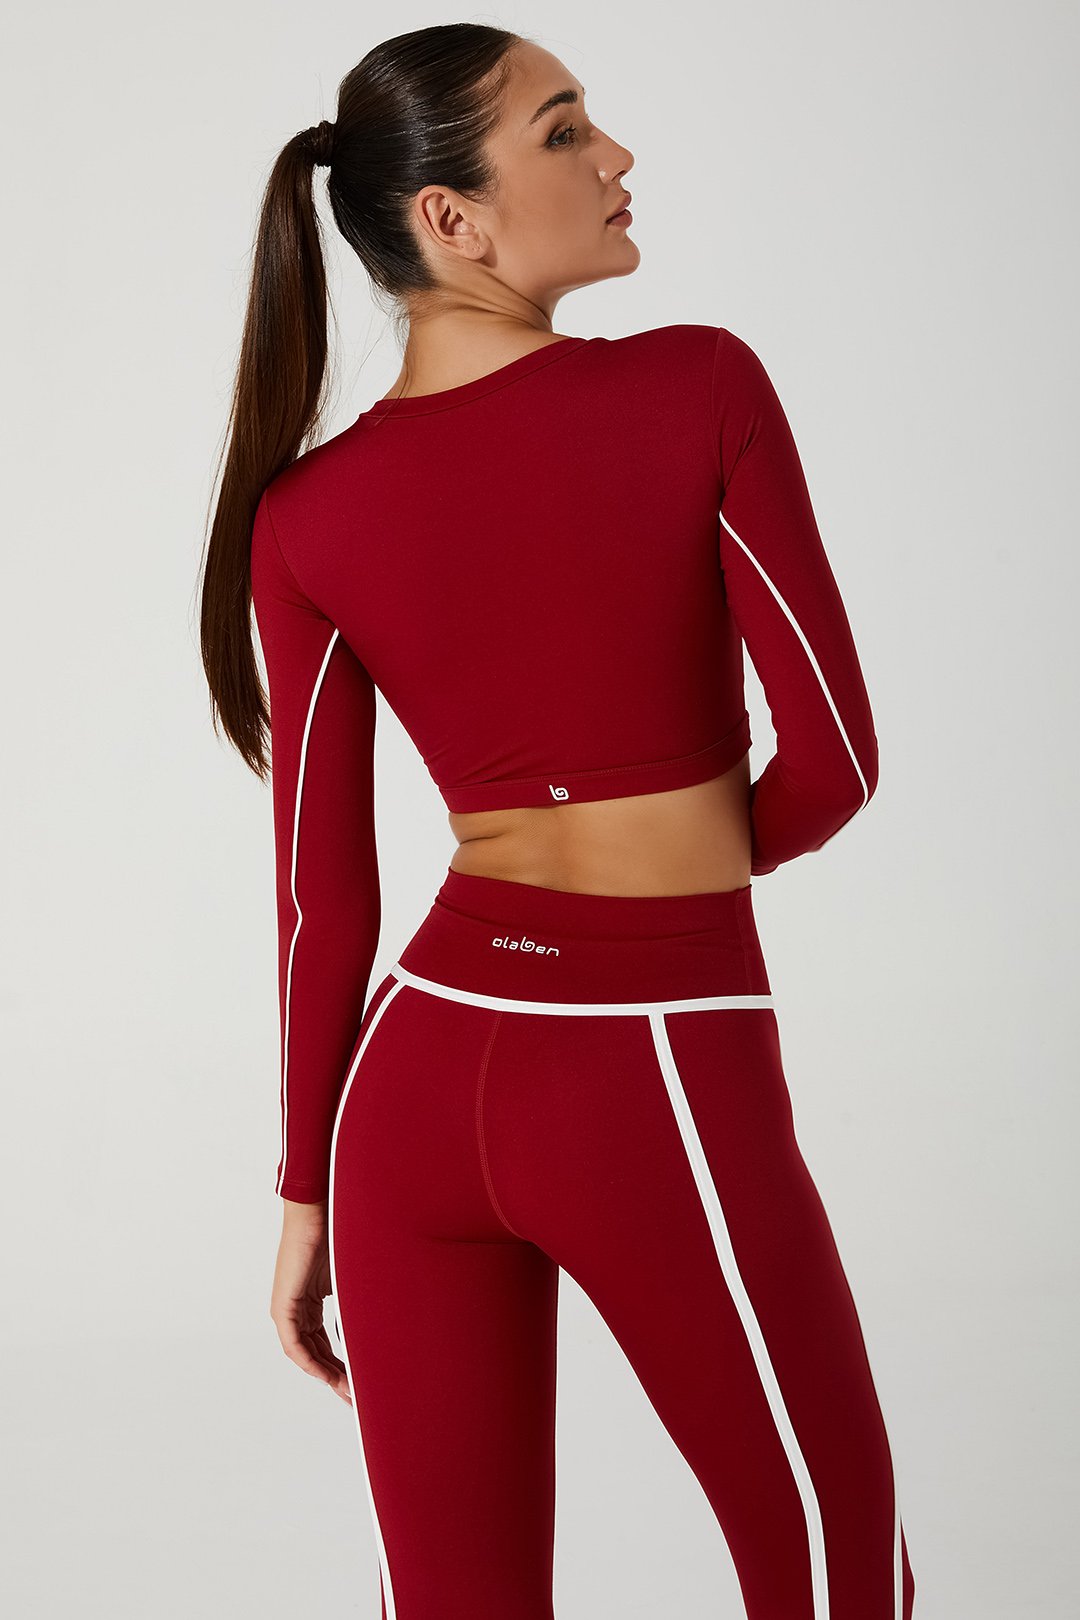 Vibrant magenta red Clio long sleeve women's bra, perfect for a stylish and comfortable look.